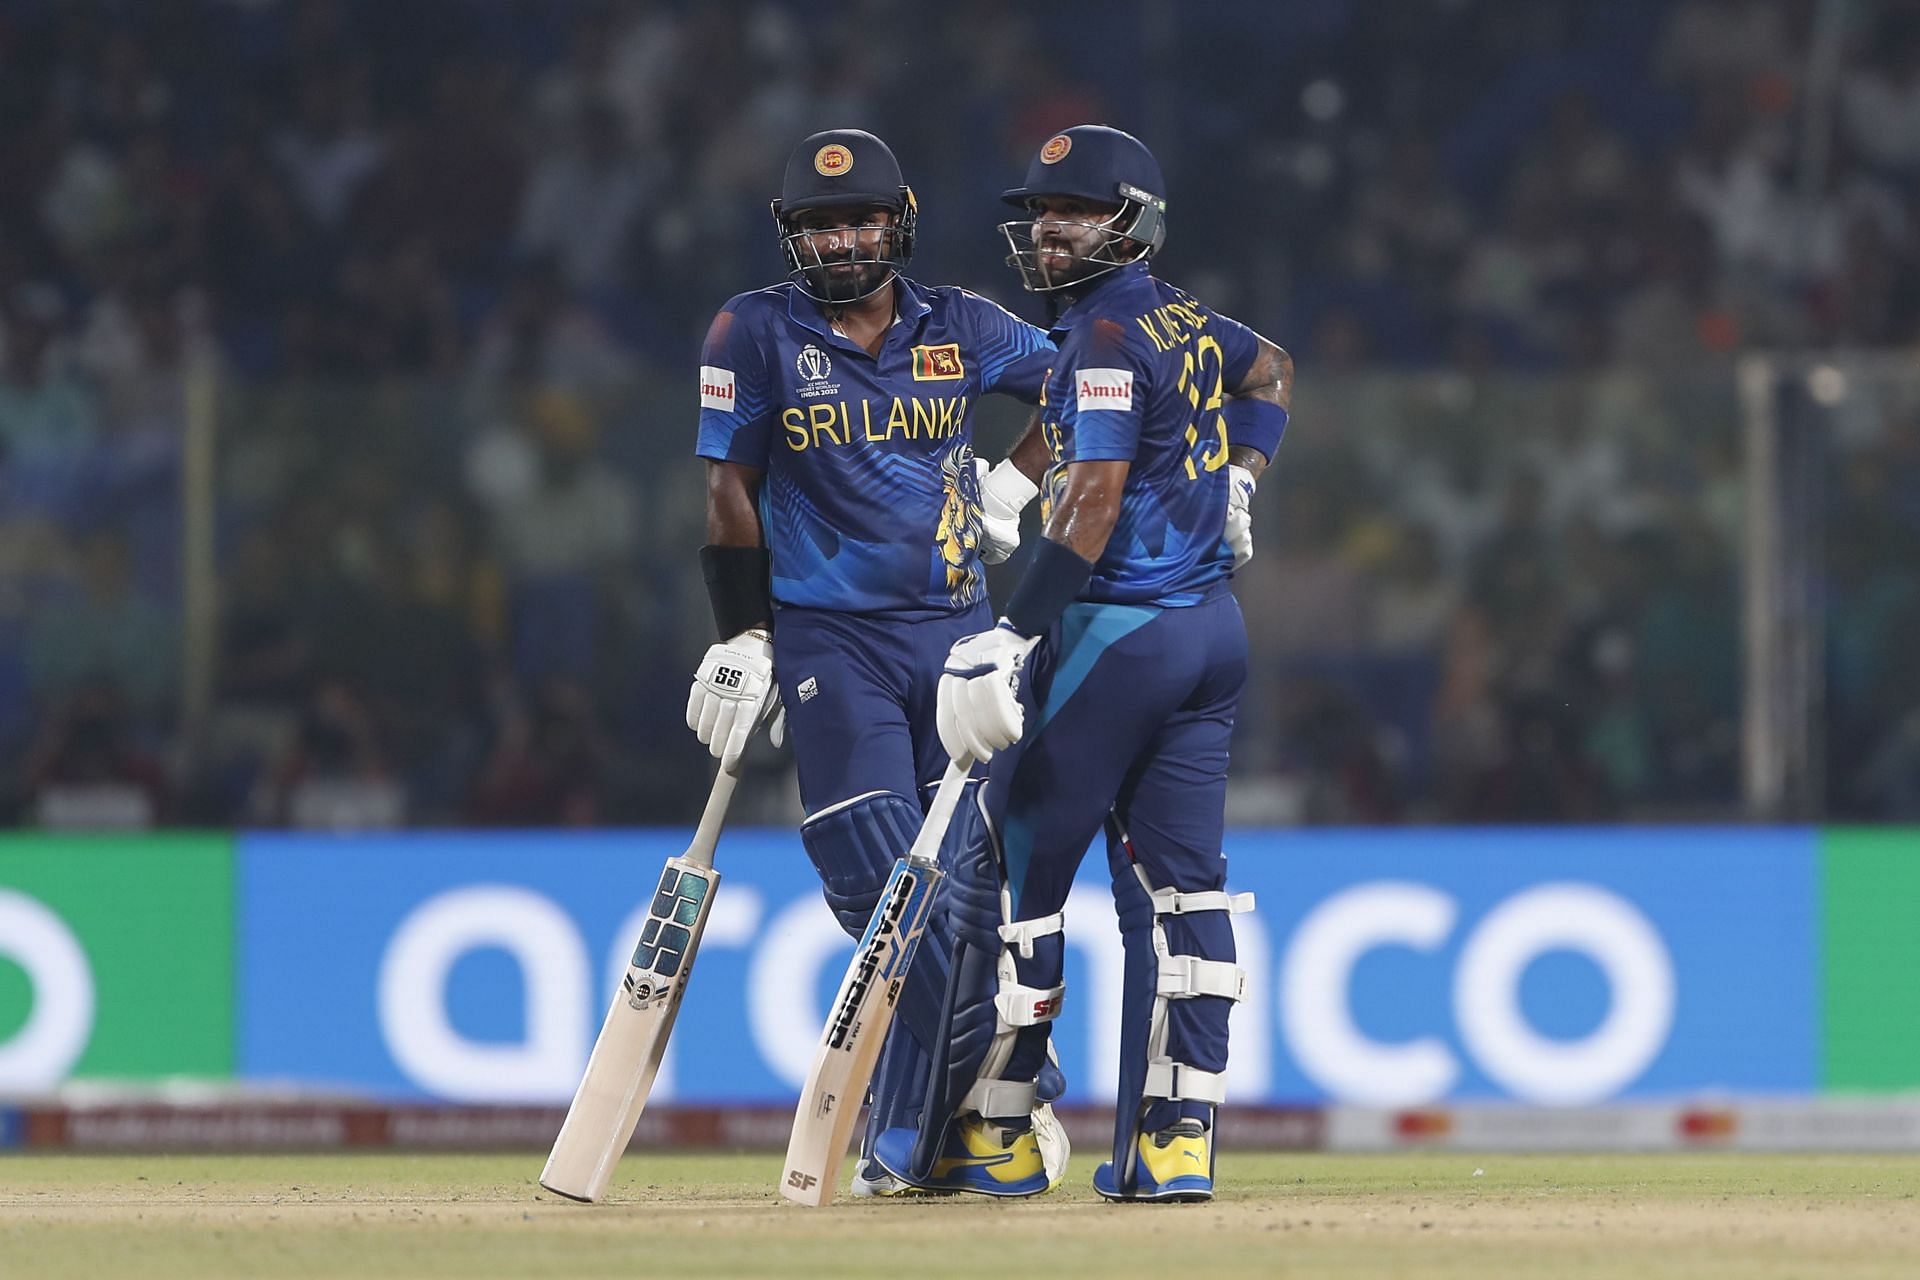 Kusal Mendis and Kusal Perera will be the key for Sri Lanka [Getty Images]